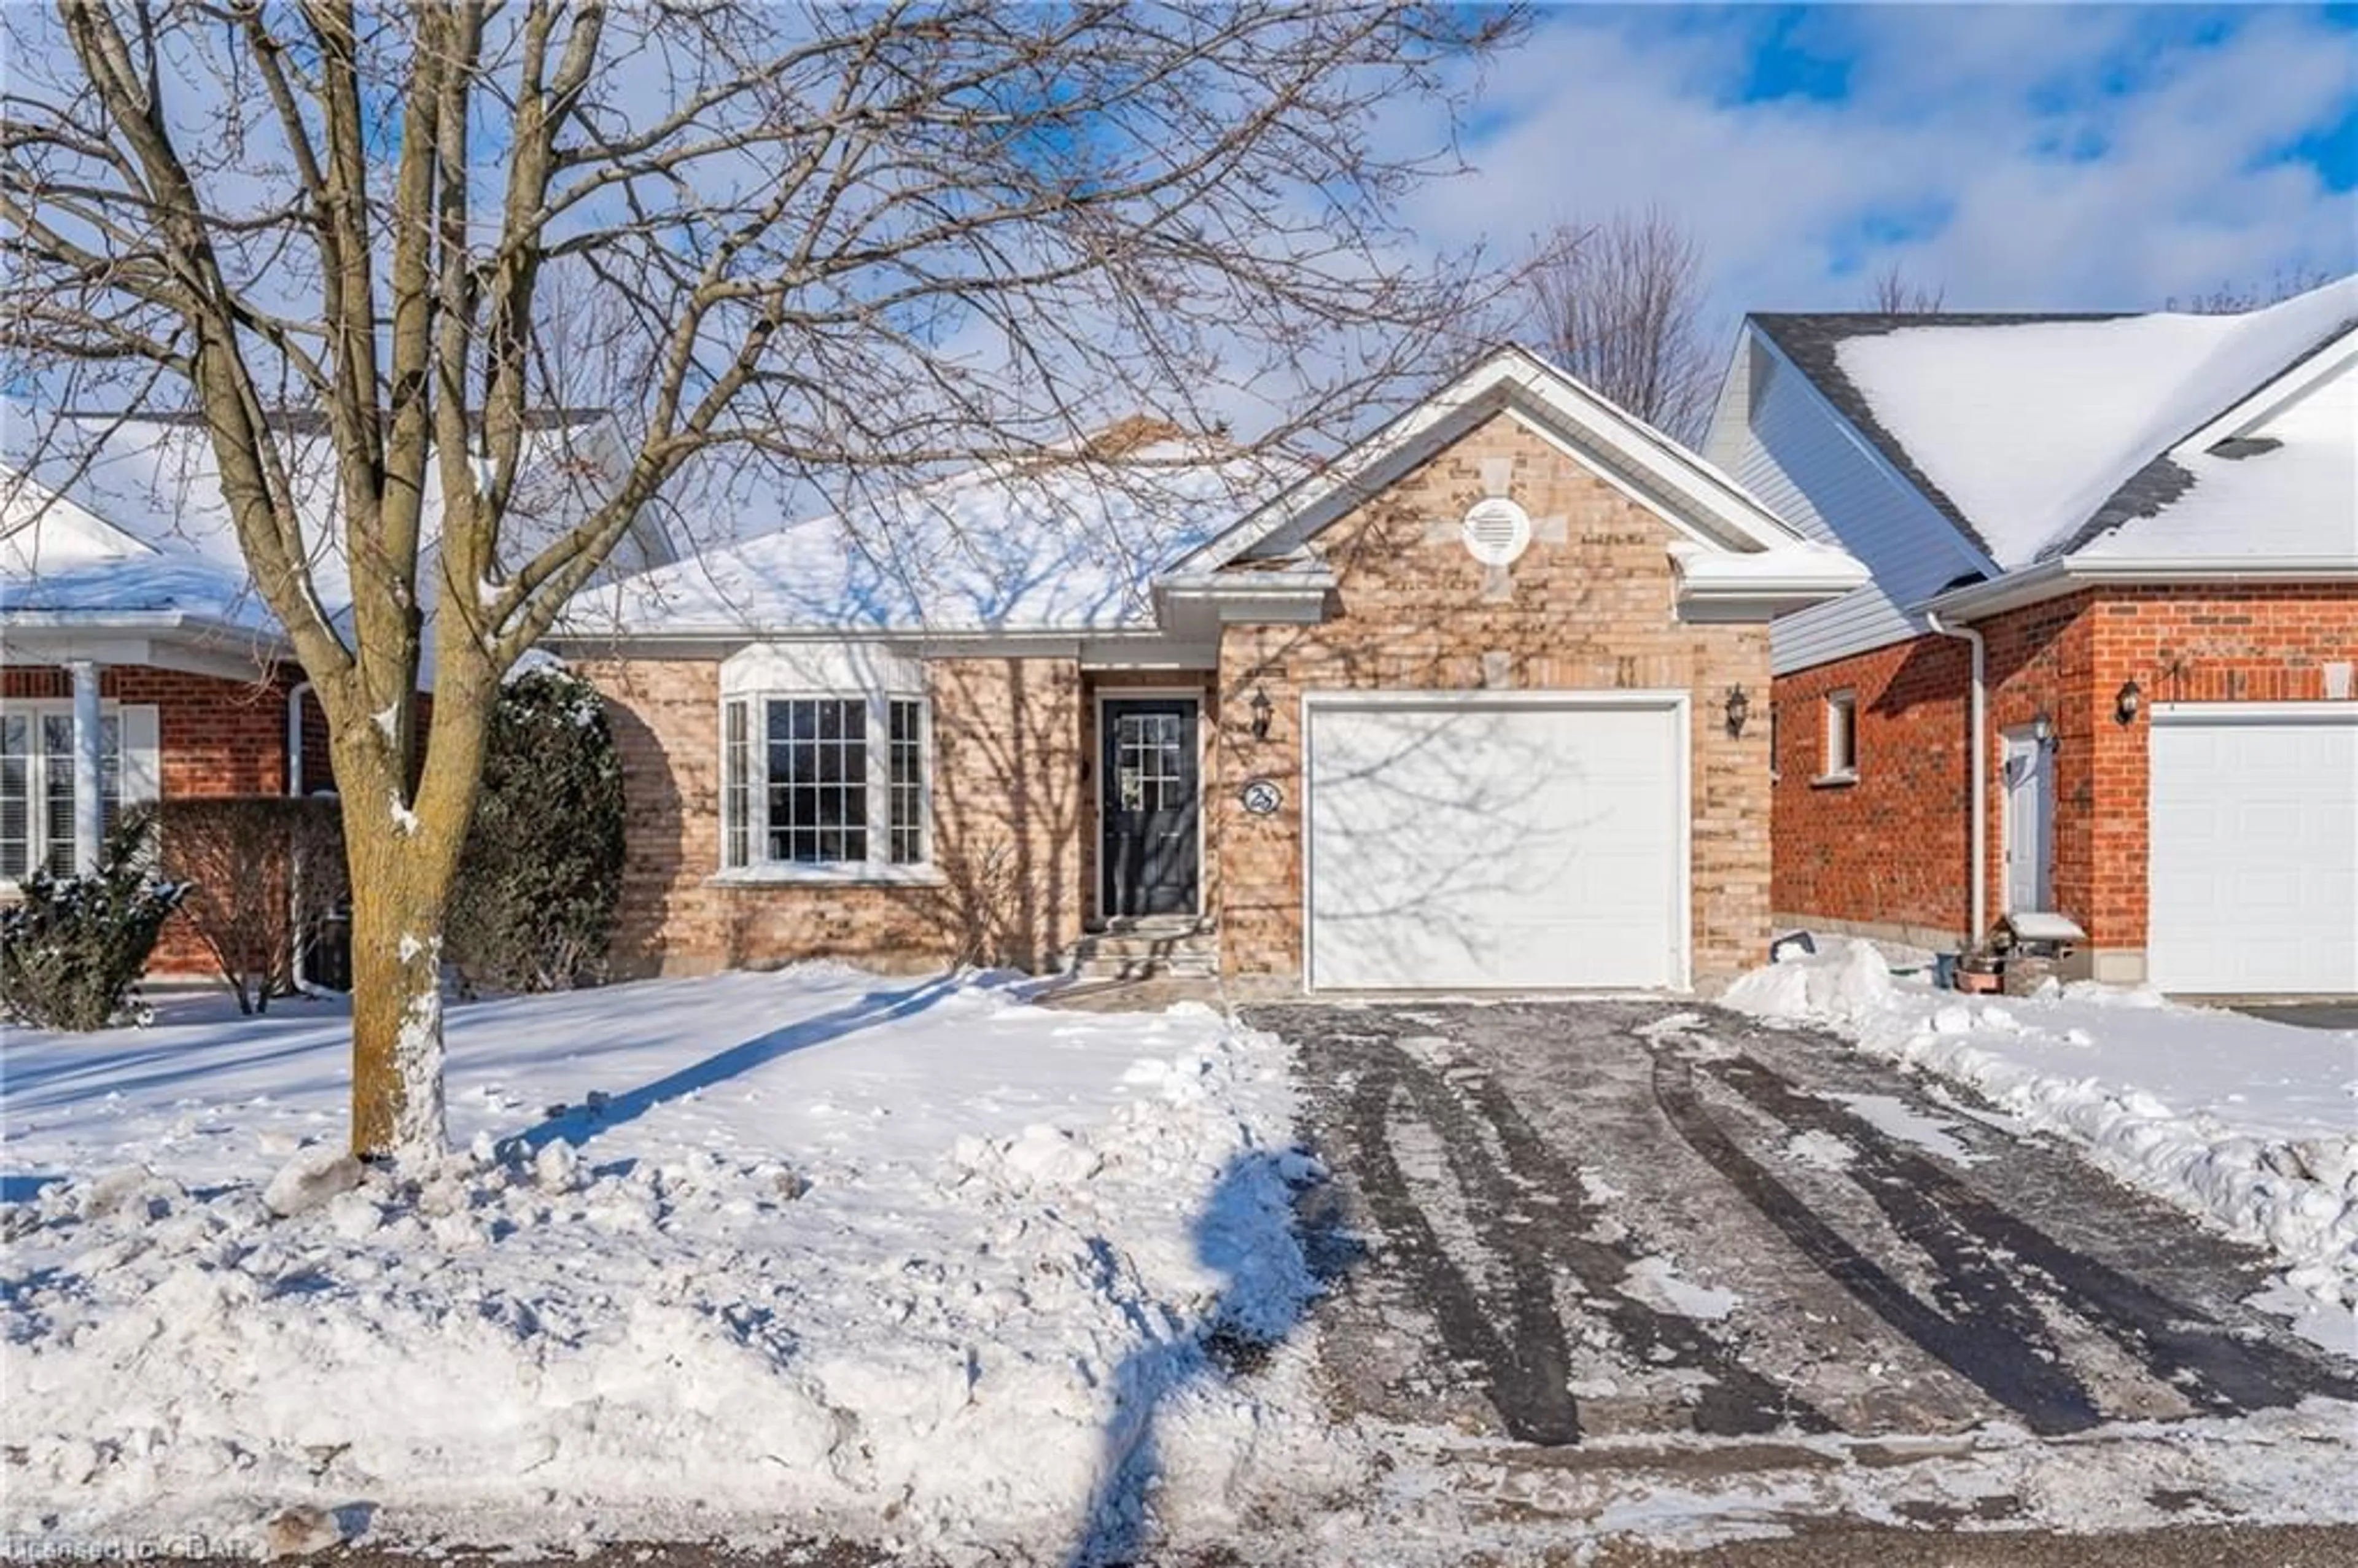 Home with brick exterior material for 28 Beechlawn Blvd, Guelph Ontario N1G 4X7